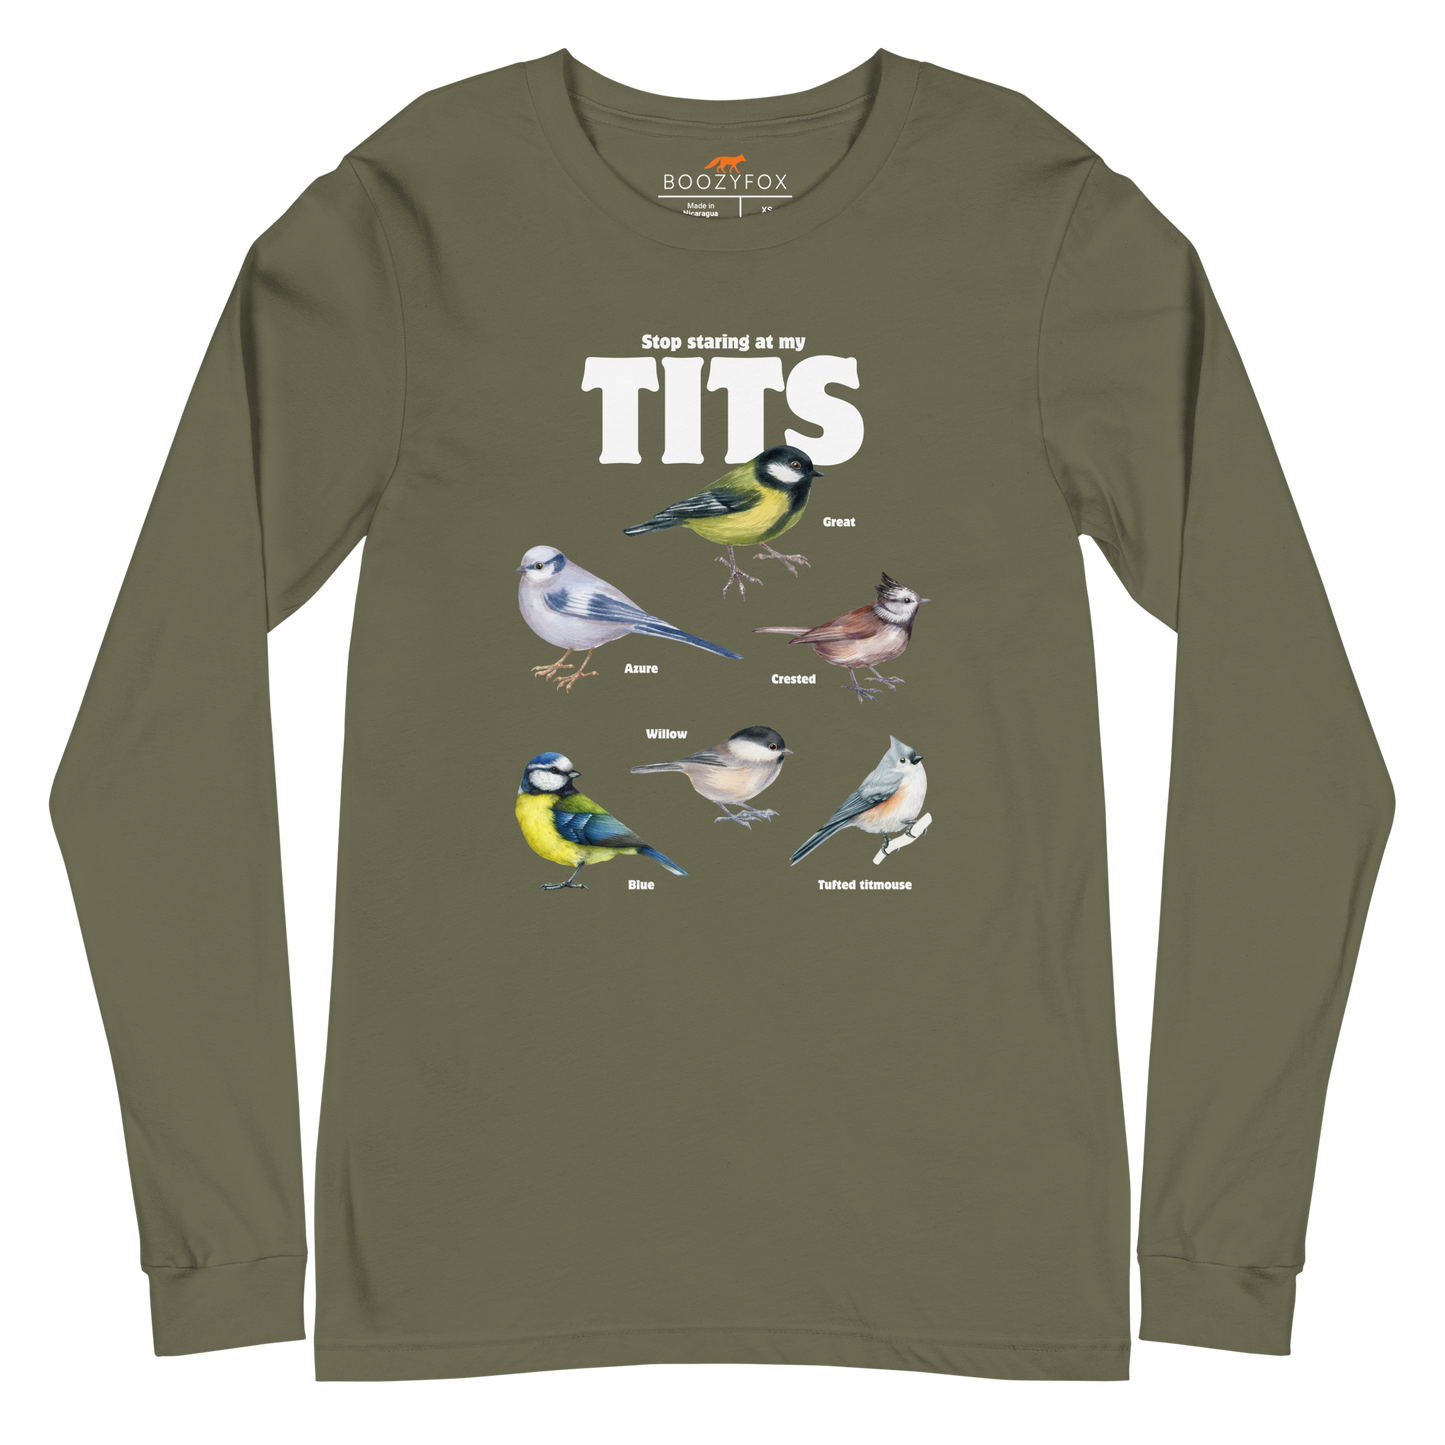 Military Green Tit Long Sleeve Tee featuring a funny Stop Staring At My Tits graphic on the chest - Funny Tit Bird Long Sleeve Graphic Tees - Boozy Fox